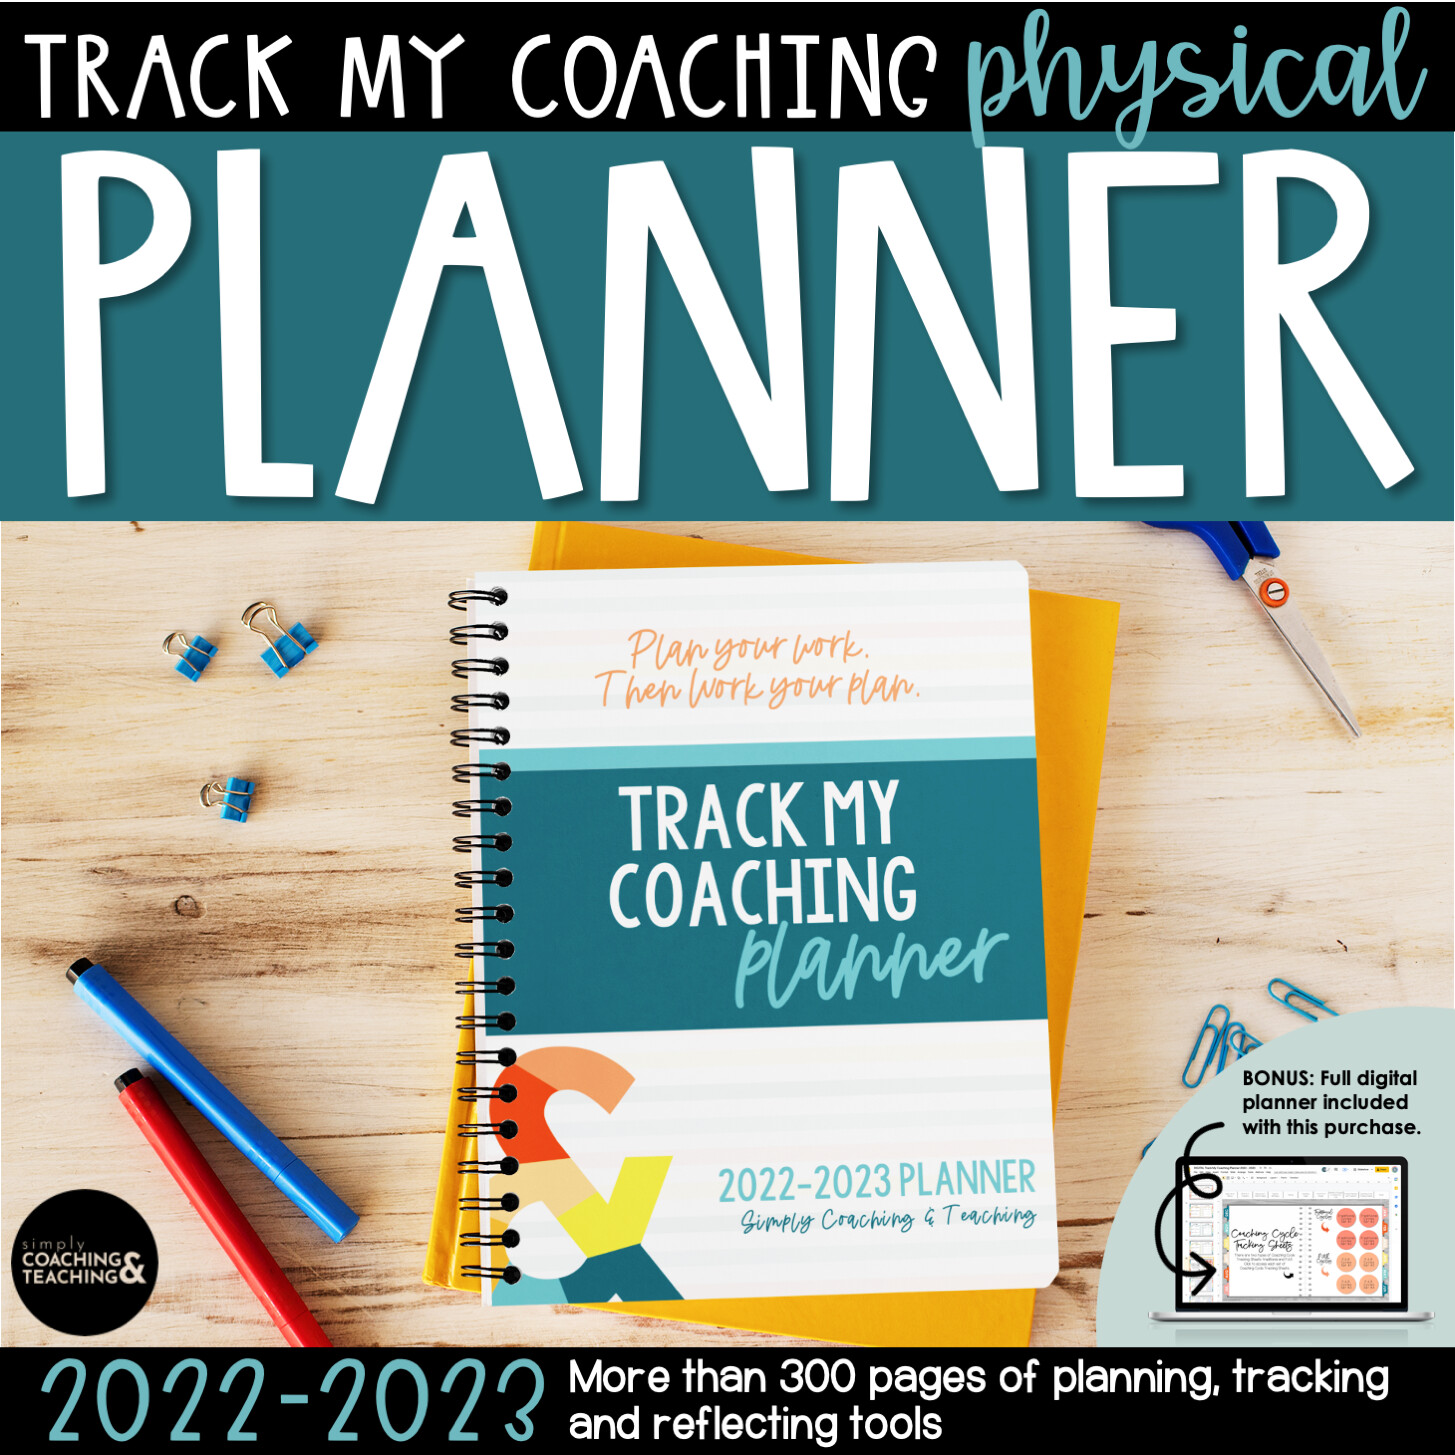 Track My Coaching 2022 - 2023 Physical Planner PRE-SALE